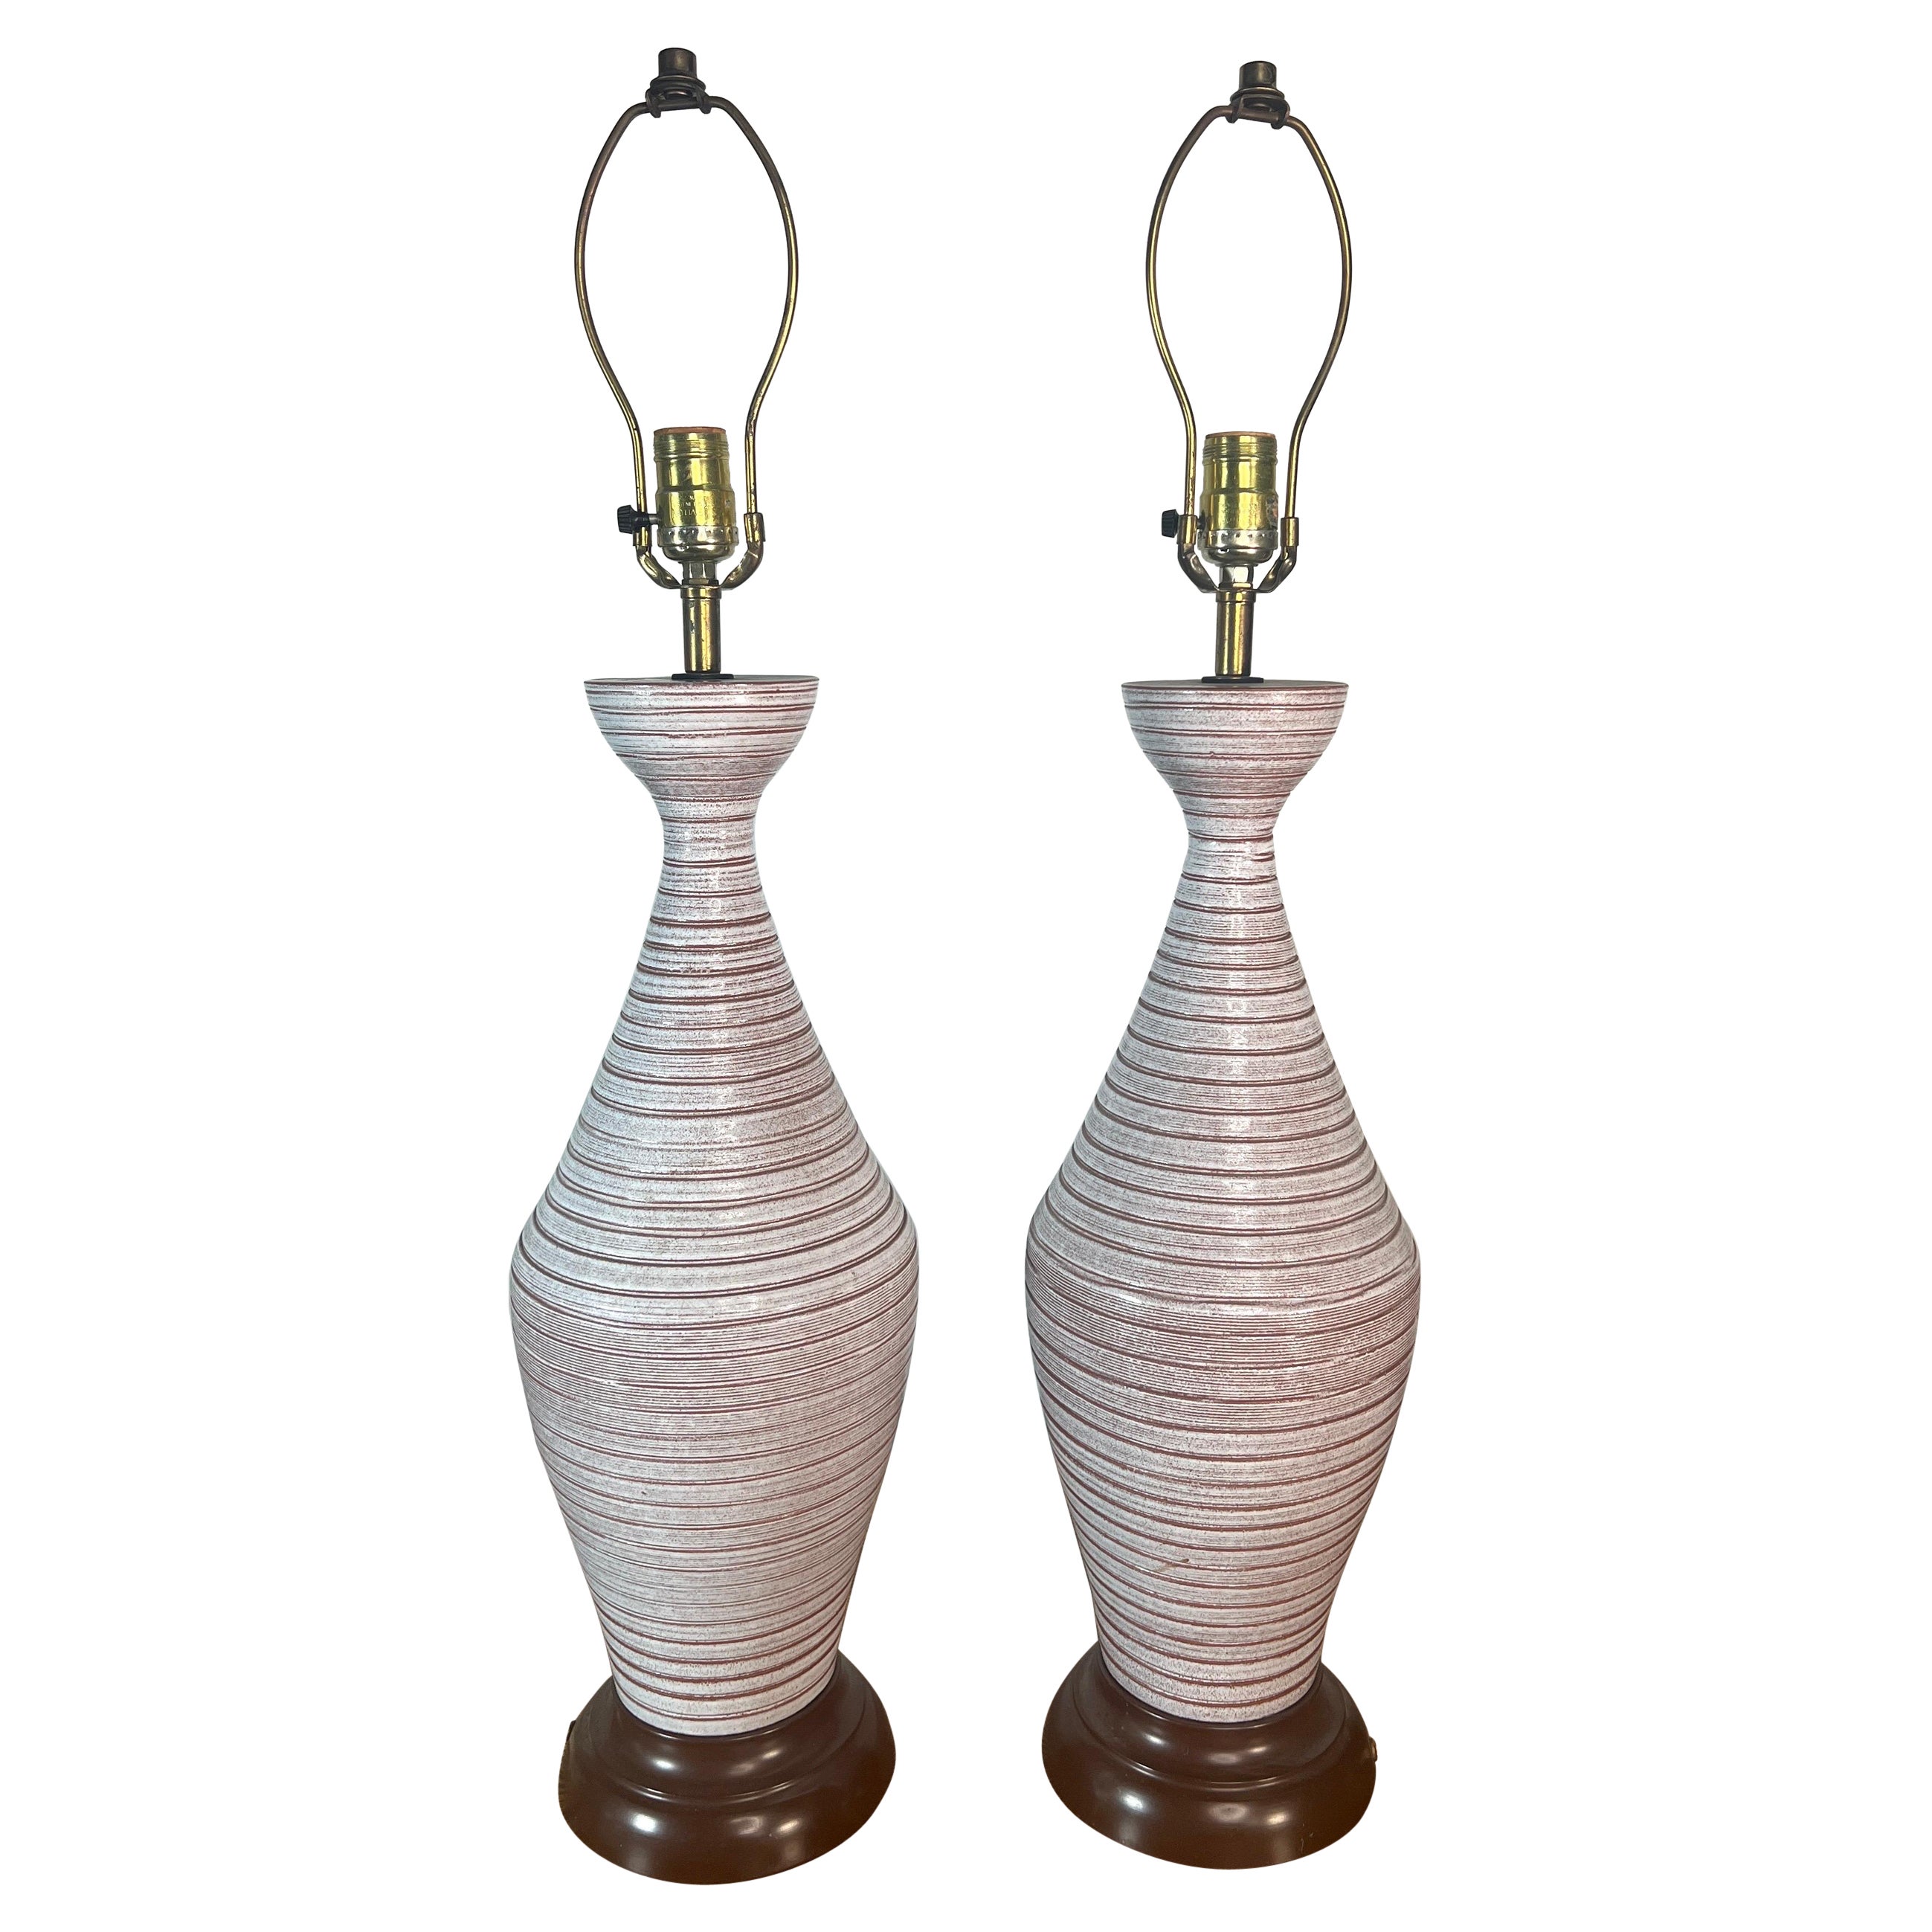 Mid-Century Modern Glazed Ceramic Table Lamps, a Pair